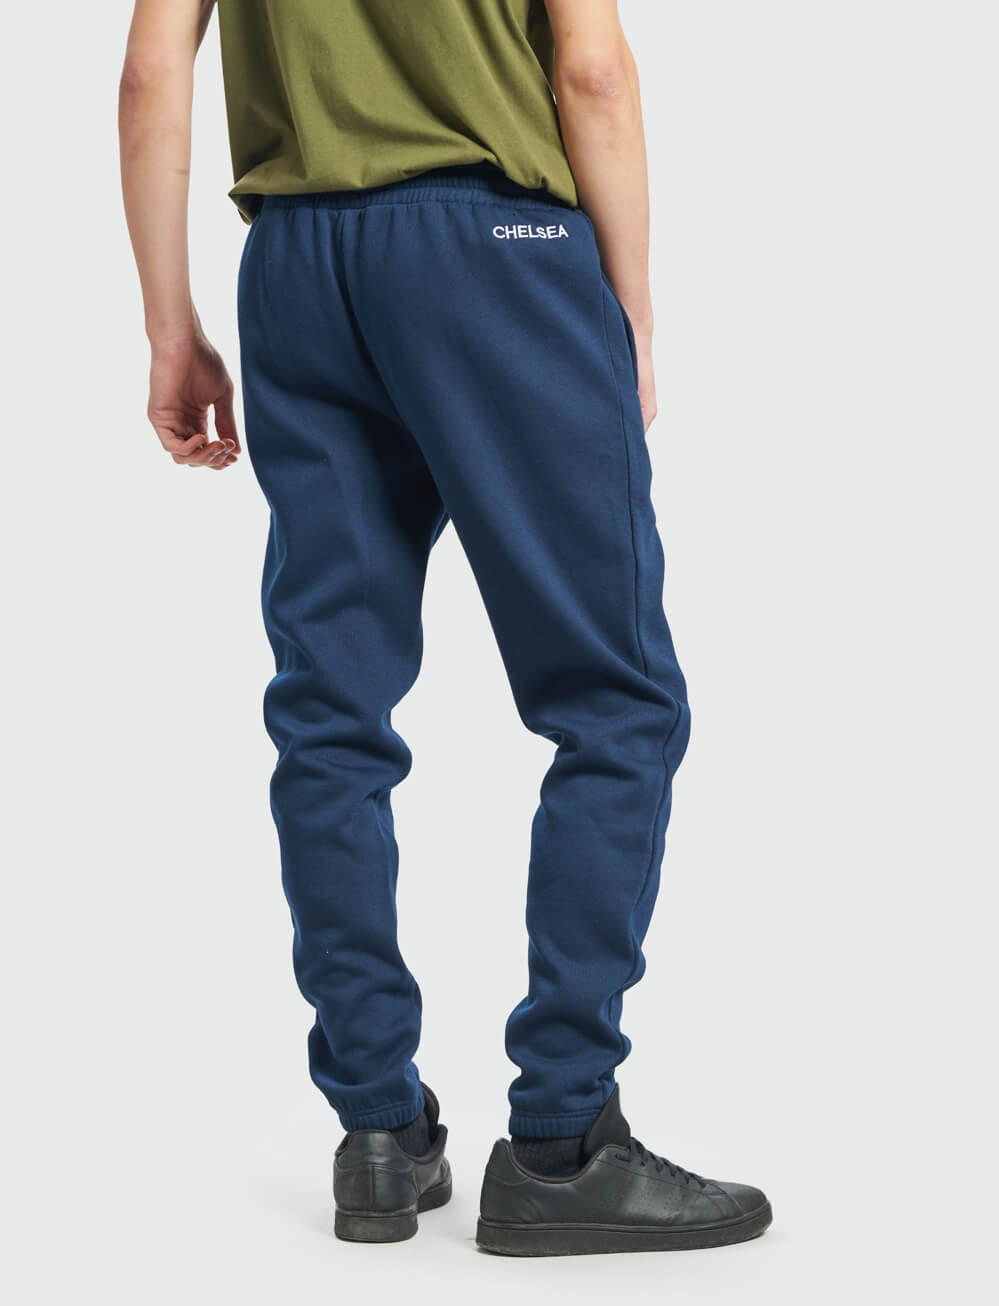 Official Chelsea Joggers - Navy - The World Football Store